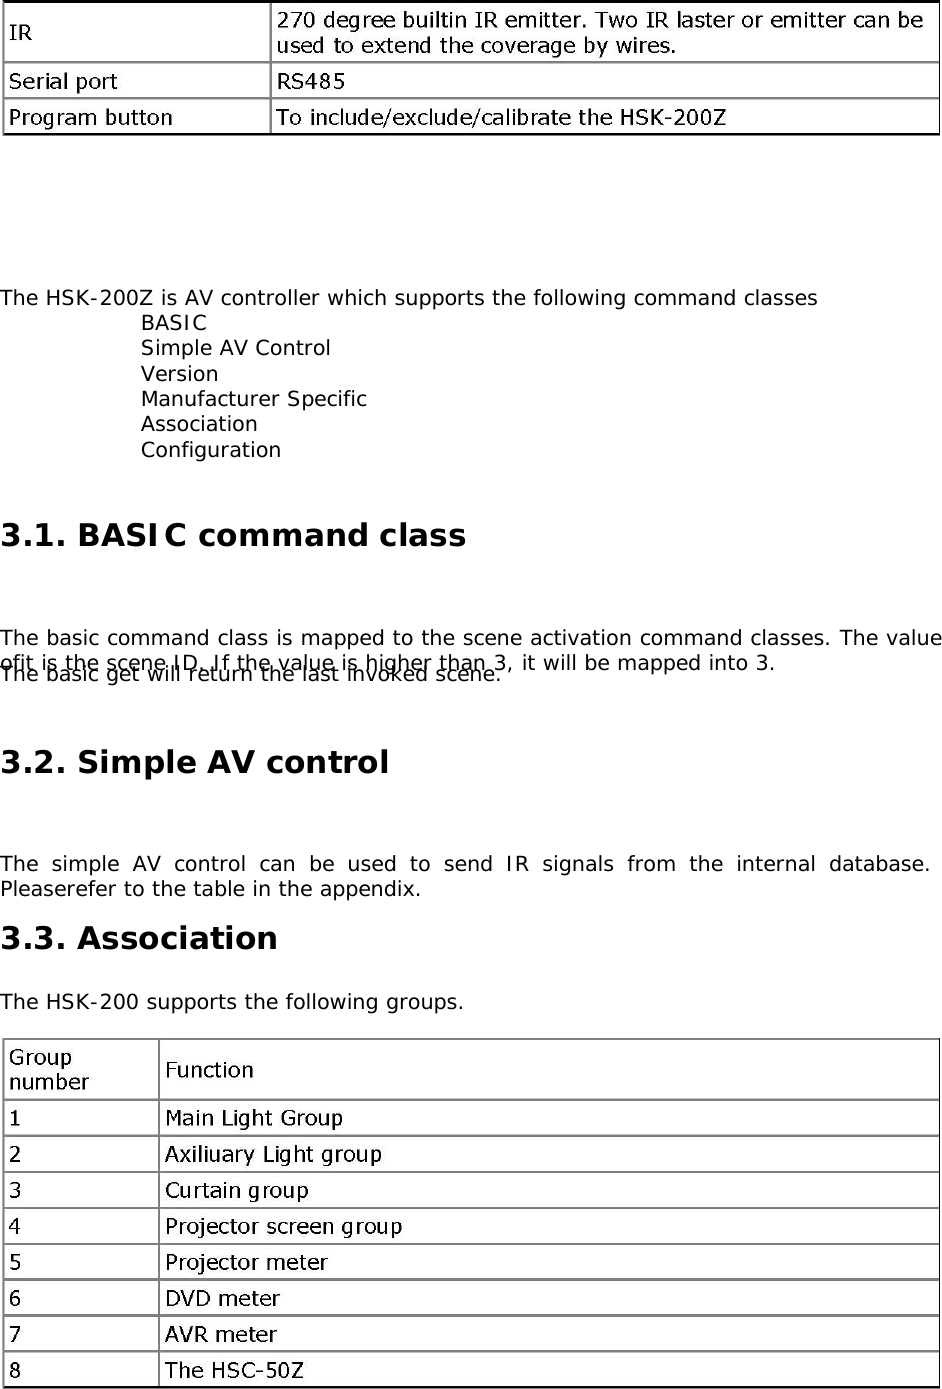         The HSK-200Z is AV controller which supports the following command classes      BASIC     Simple AV Control     Version     Manufacturer Specific     Association     Configuration    3.1. BASIC command class    The basic command class is mapped to the scene activation command classes. The value will be mapped into 3.   ofit is the scene ID. If the value is higher than 3, it The basic get will return the last invoked scene.    3.2. Simple AV control    The simple AV control can be used to send IR signals from the internal database.Pleaserefer to the table in the appendix.    3.3. Association    The HSK-200 supports the following groups.       